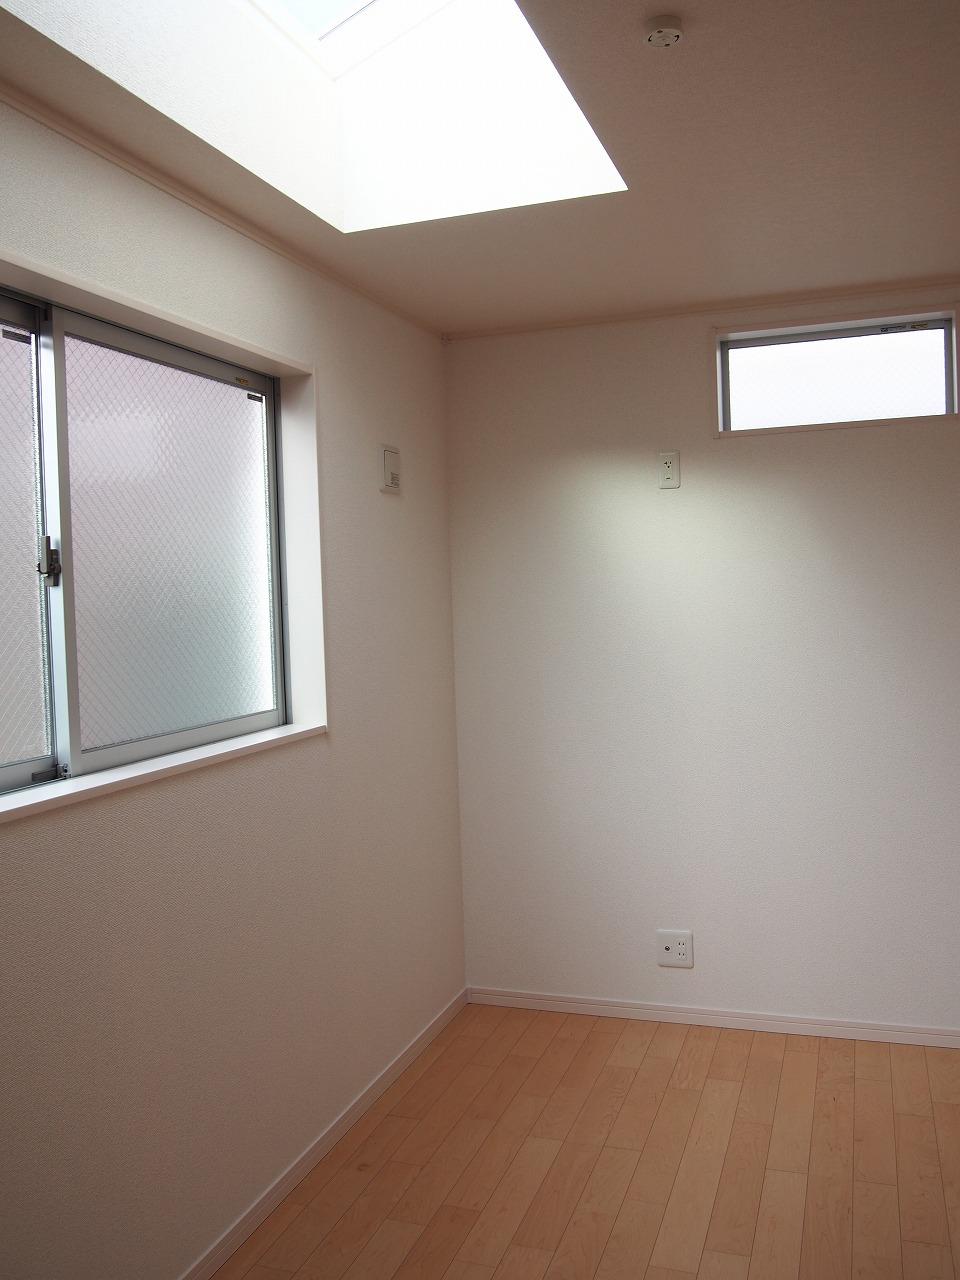 Non-living room. Top light has been applied to the ceiling